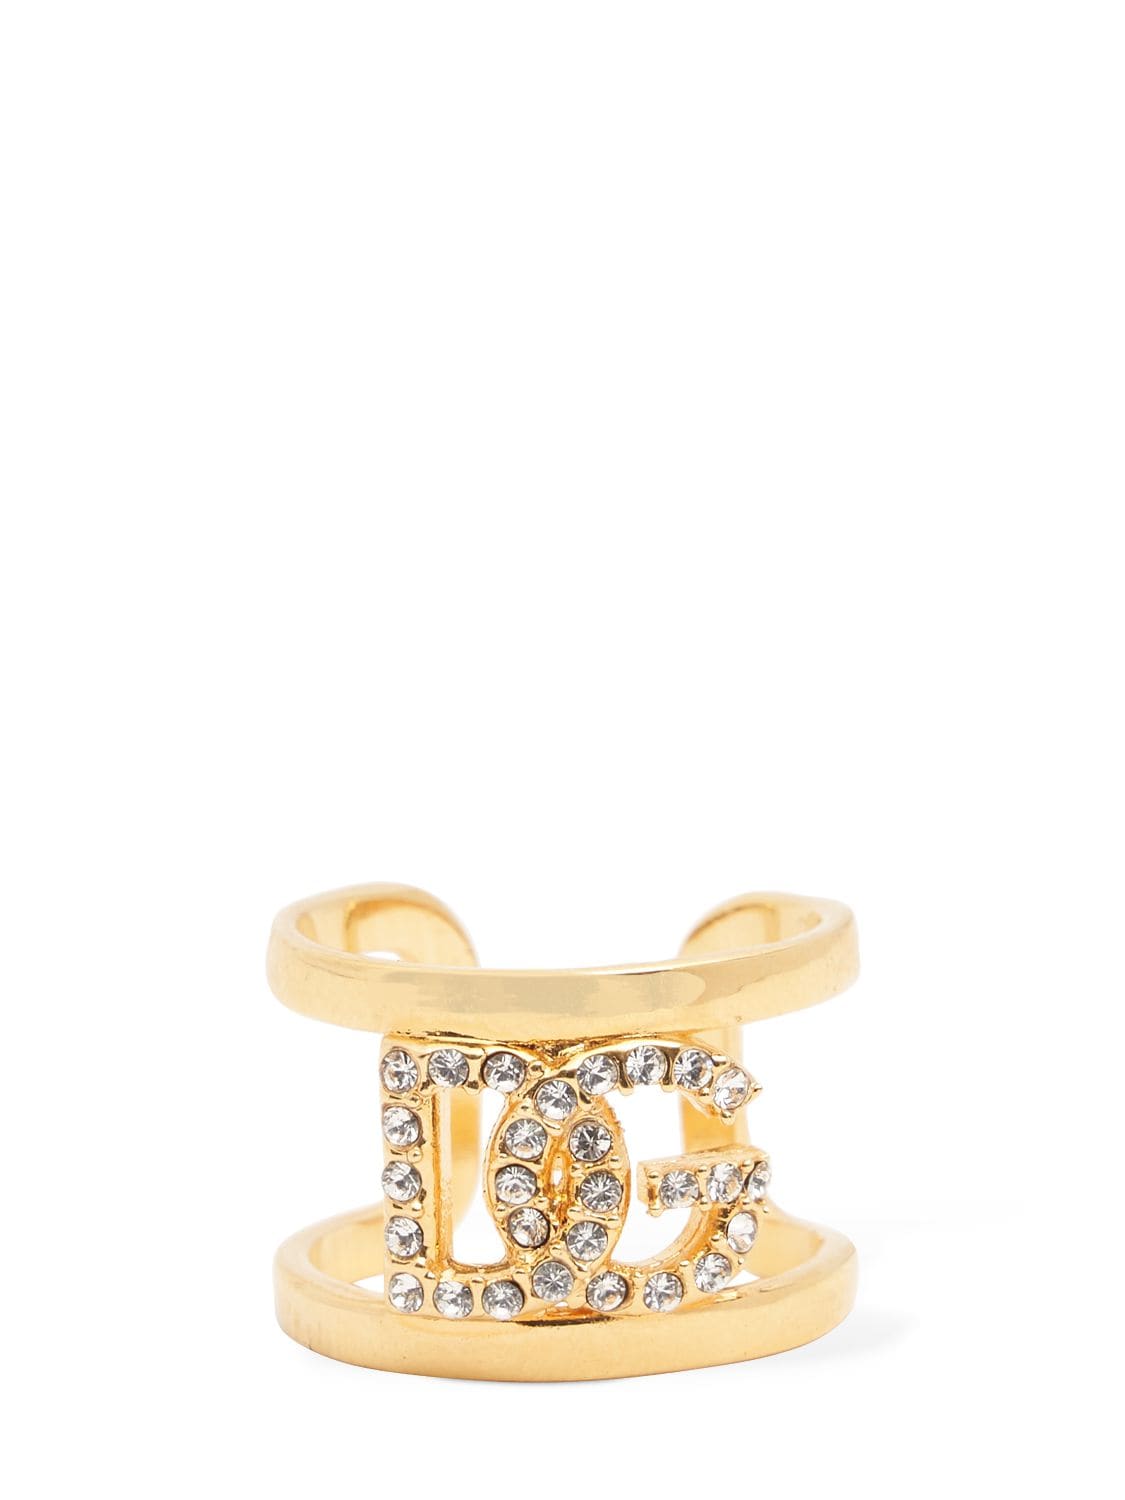 Dolce & Gabbana Dg Crystal Open Ring In Gold,crystal